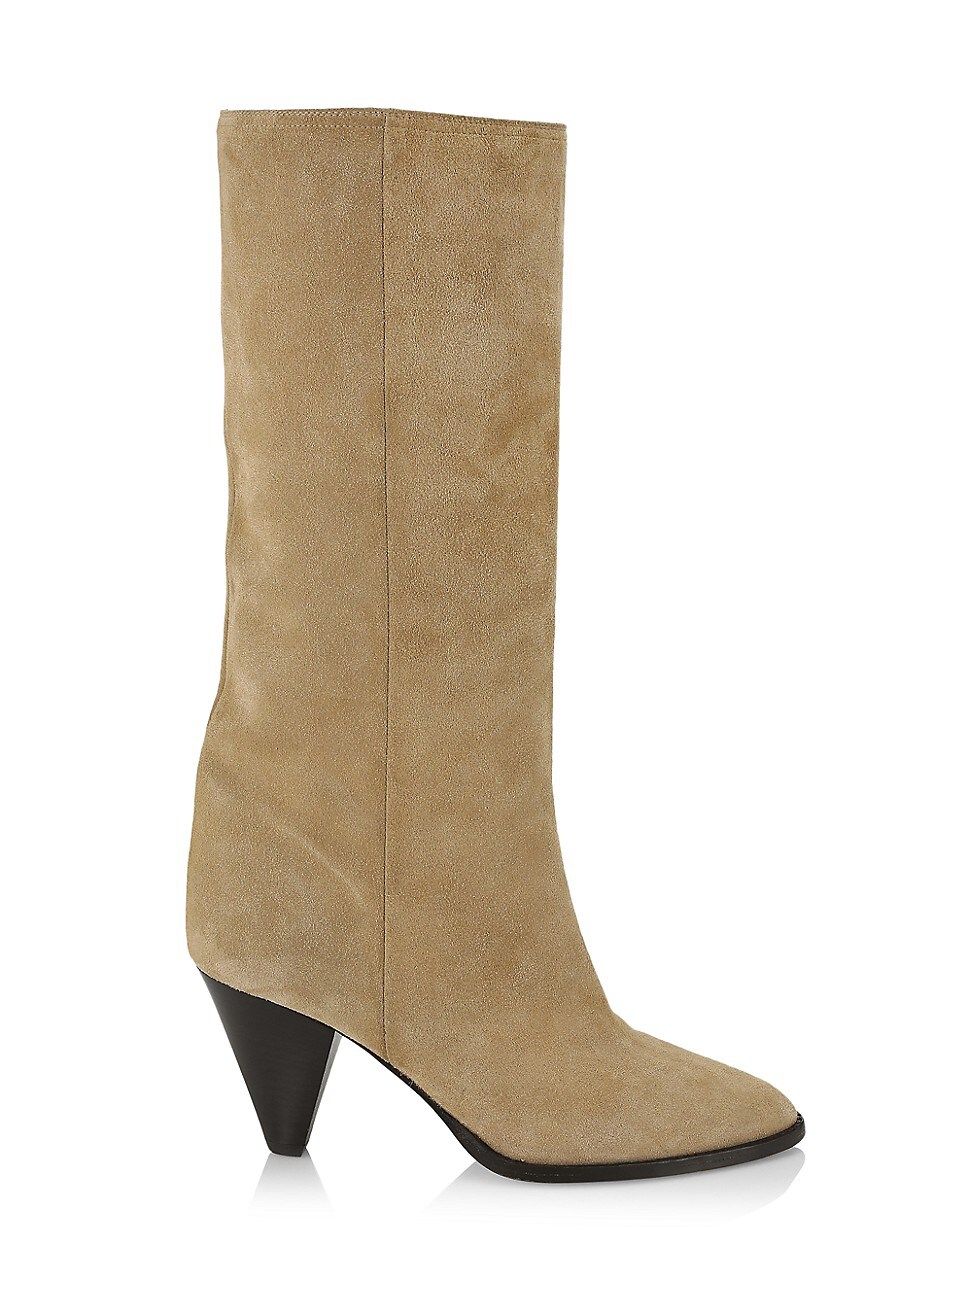 Women's Rouxy Suede Pointed-Toe Boots - Beige - Size 5 | Saks Fifth Avenue